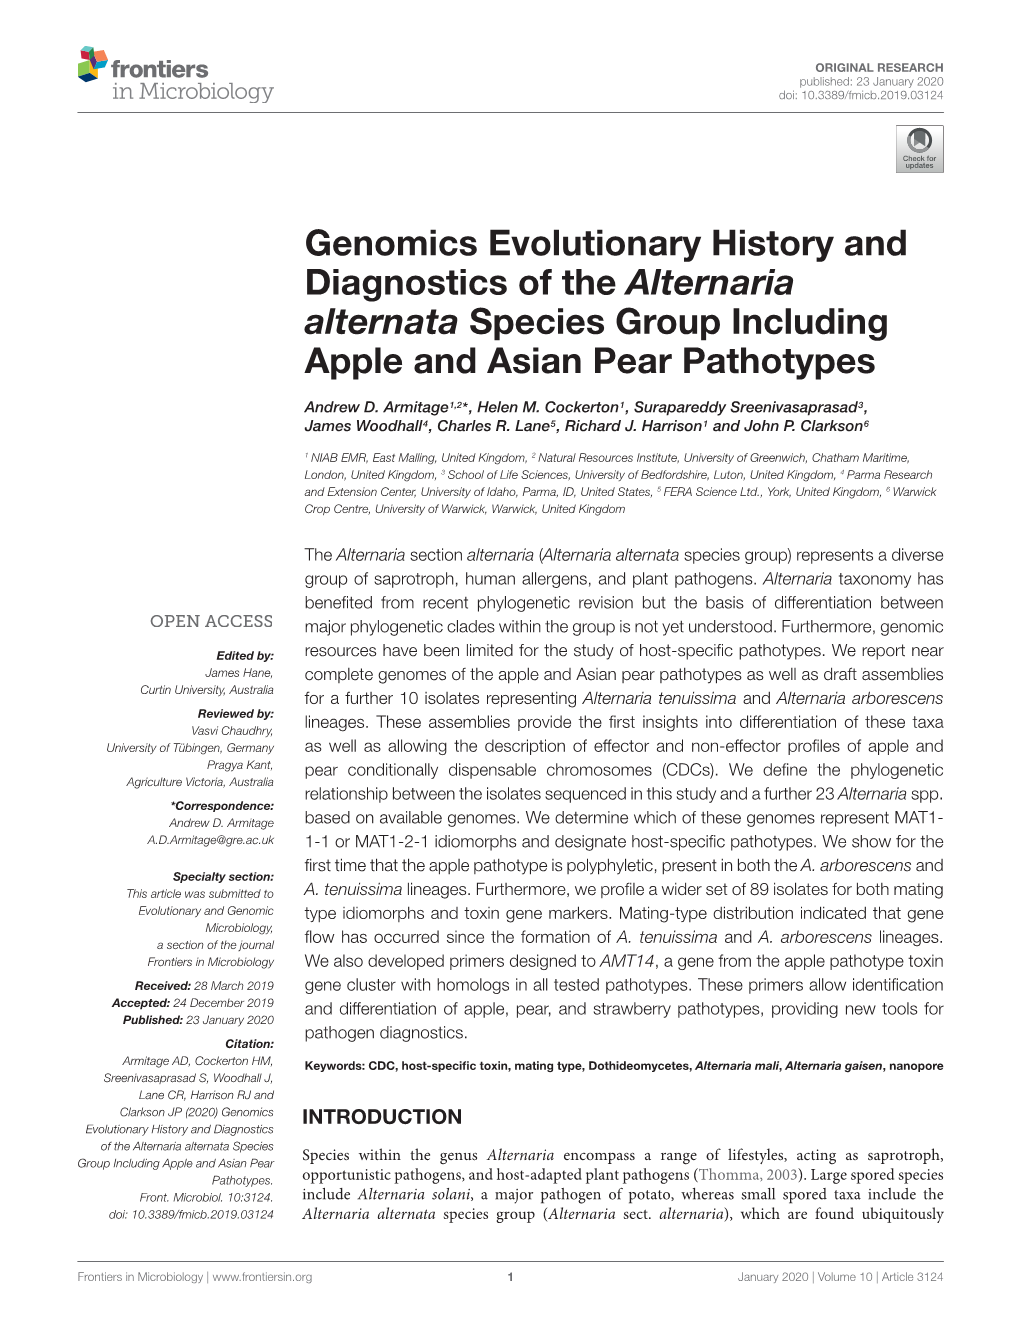 Genomics Evolutionary History and Diagnostics of the Alternaria Alternata Species Group Including Apple and Asian Pear Pathotypes